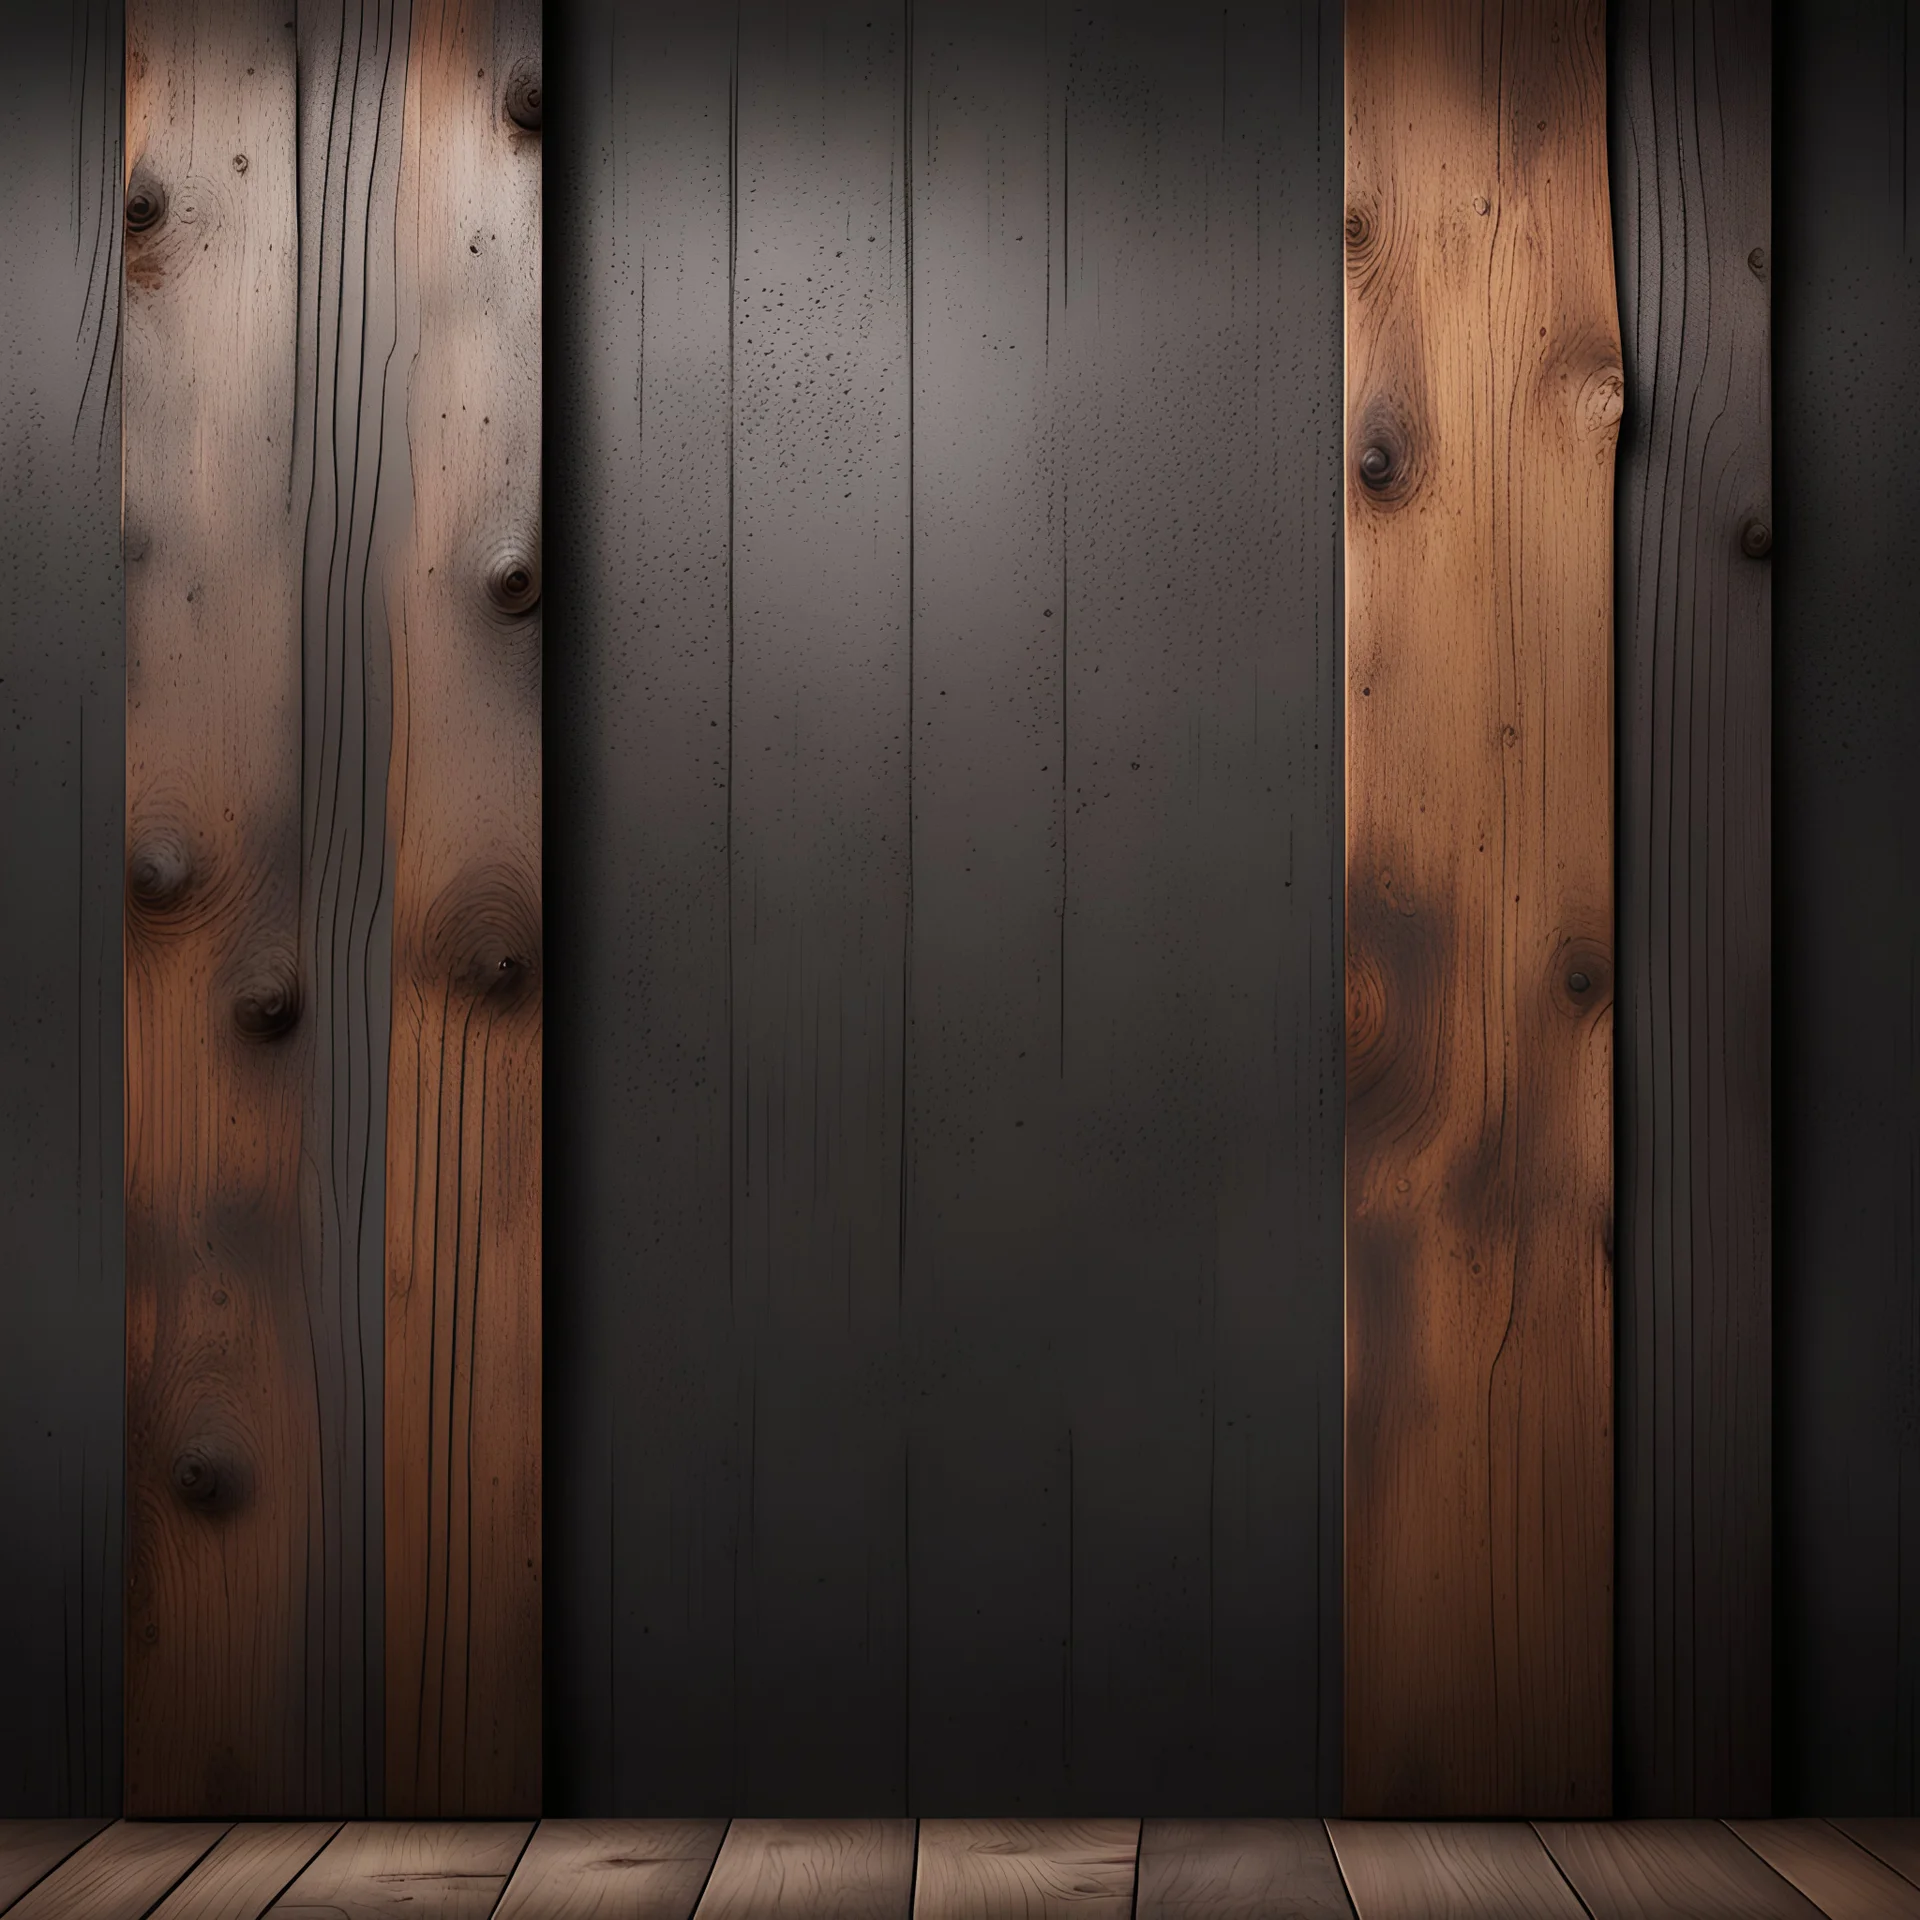 Hyper Realistic rustic steel & wood with textured vintage wall & dark background